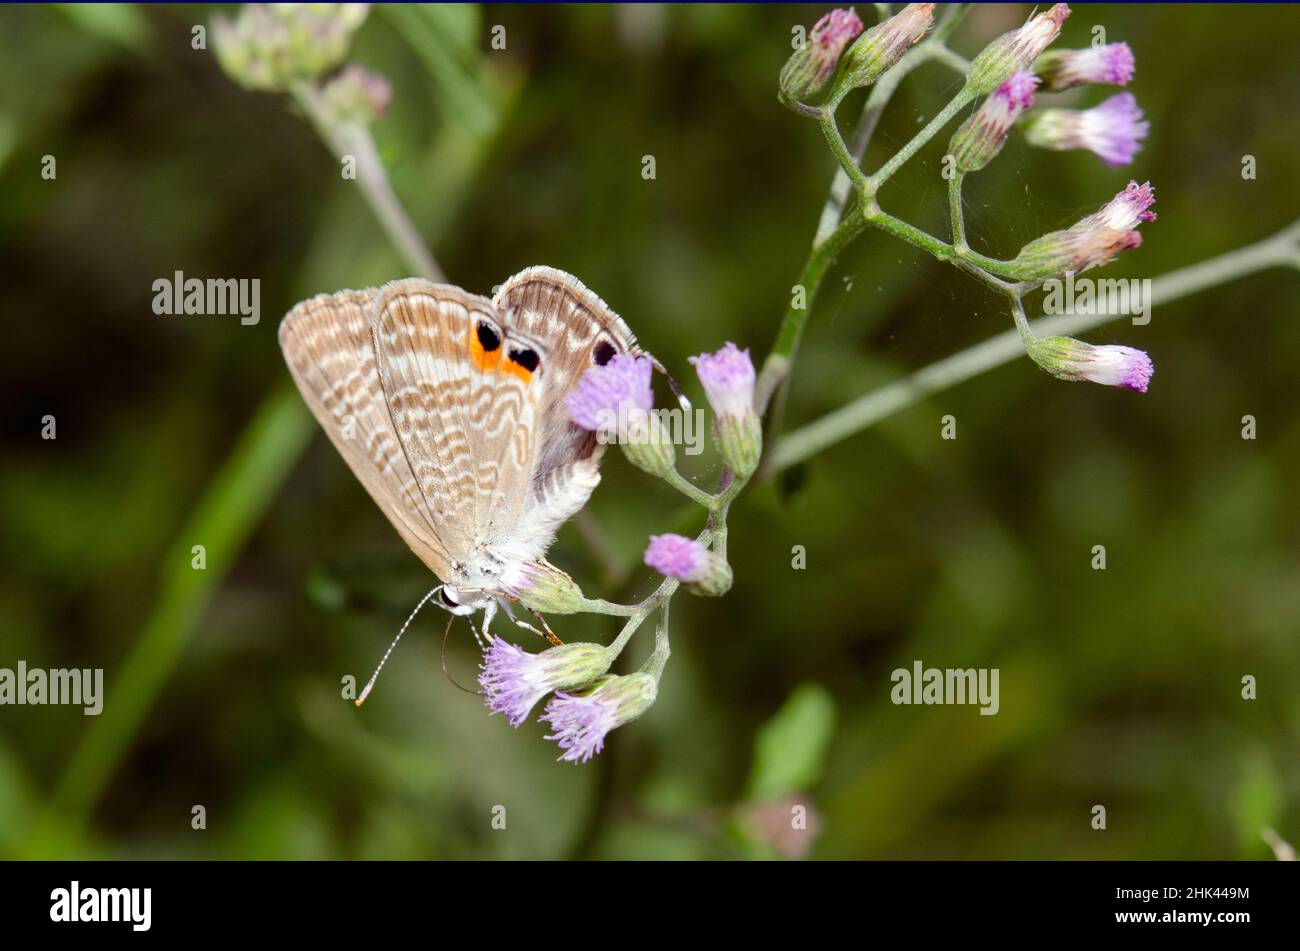 Pea Blue Buttefly, Lampides boeticus, with proboscis on Goatweed flower, Ageratum conyzoides, Pering, Gianyar, Bali, Indonesia Stock Photo